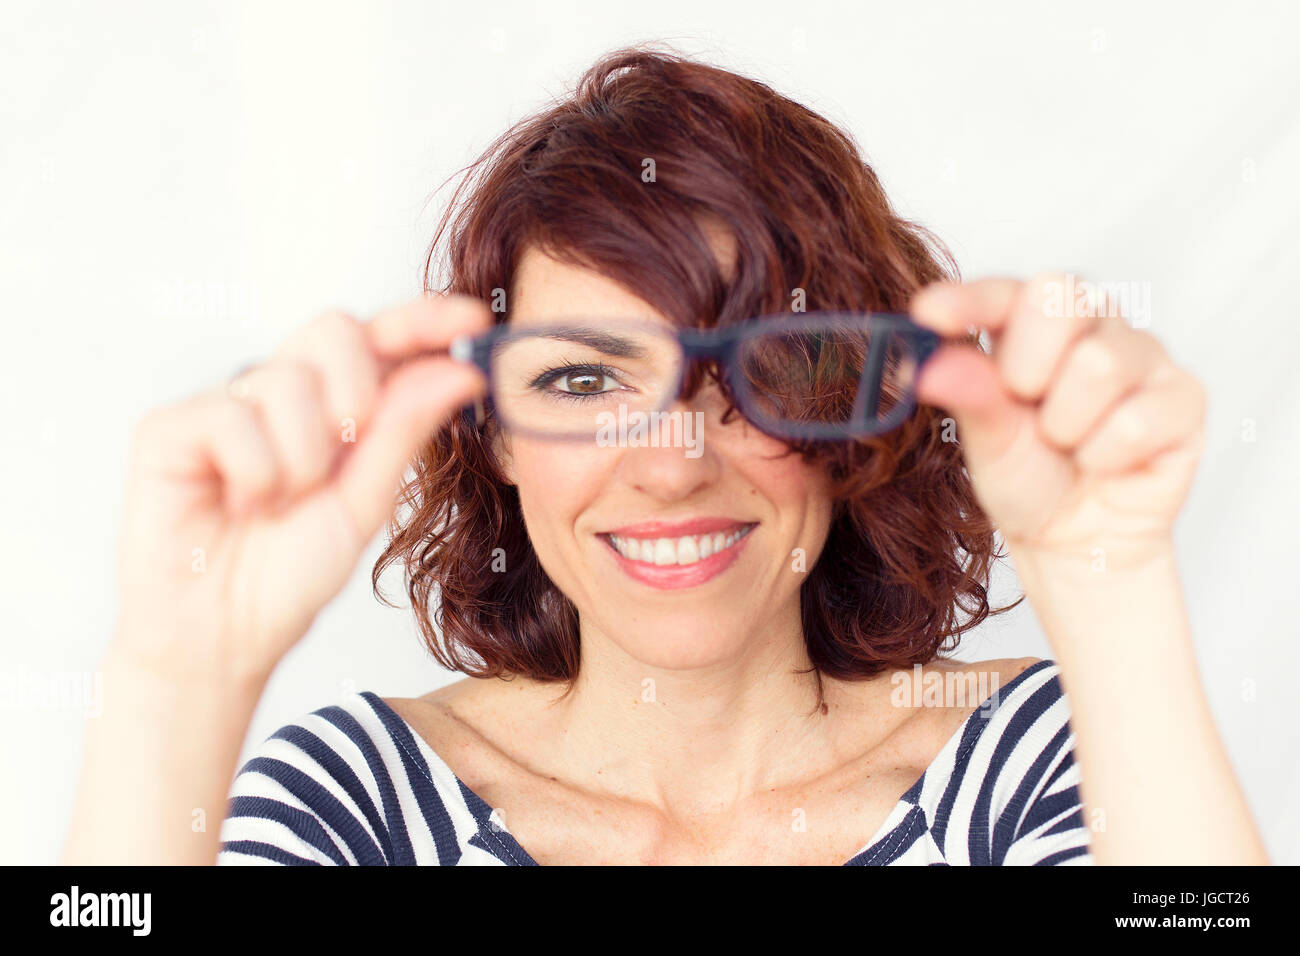 Smiling woman holding a pair of spectacles Stock Photo